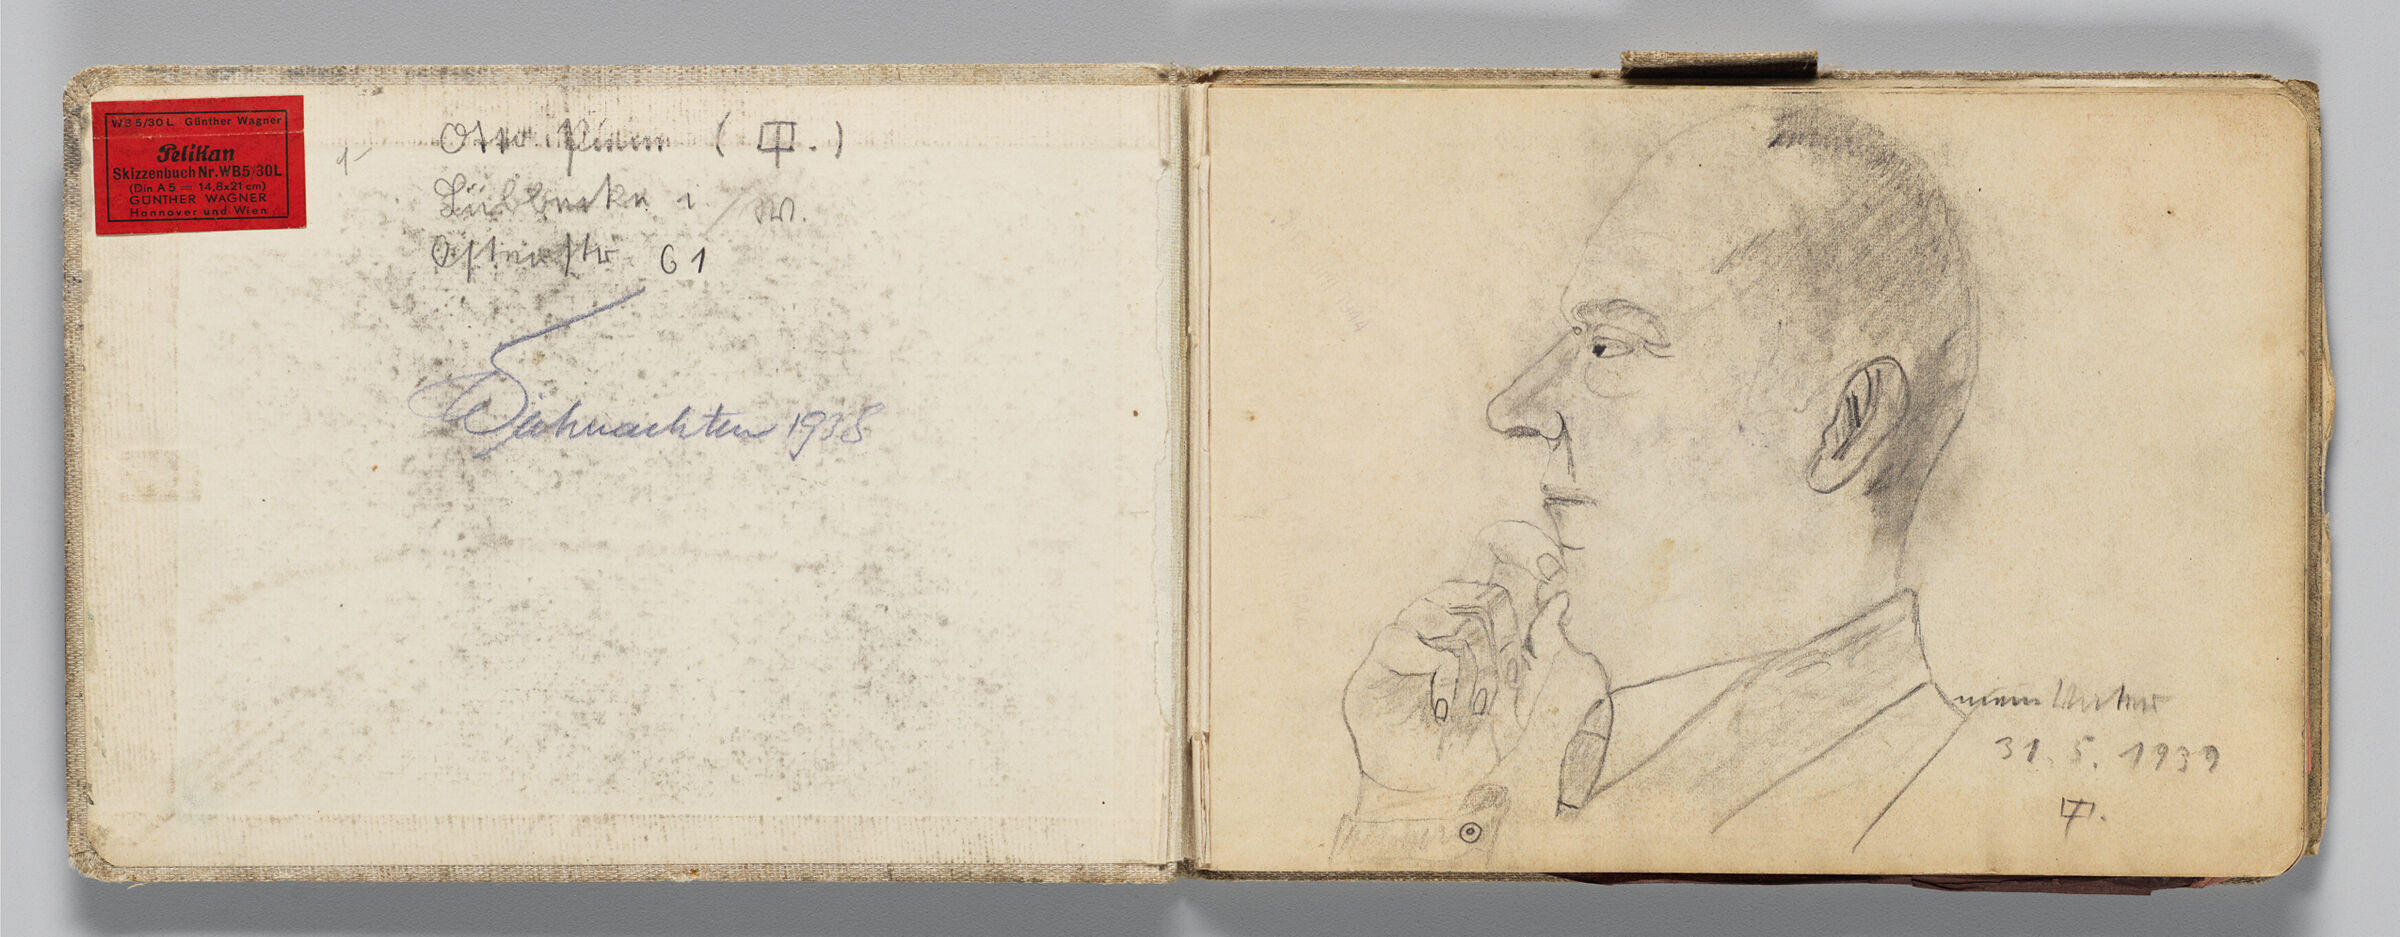 Untitled (Front Endpaper With Signature And Address, Left Page); Untitled (Portrait In Profile Of The Artist's Father, Right Page)